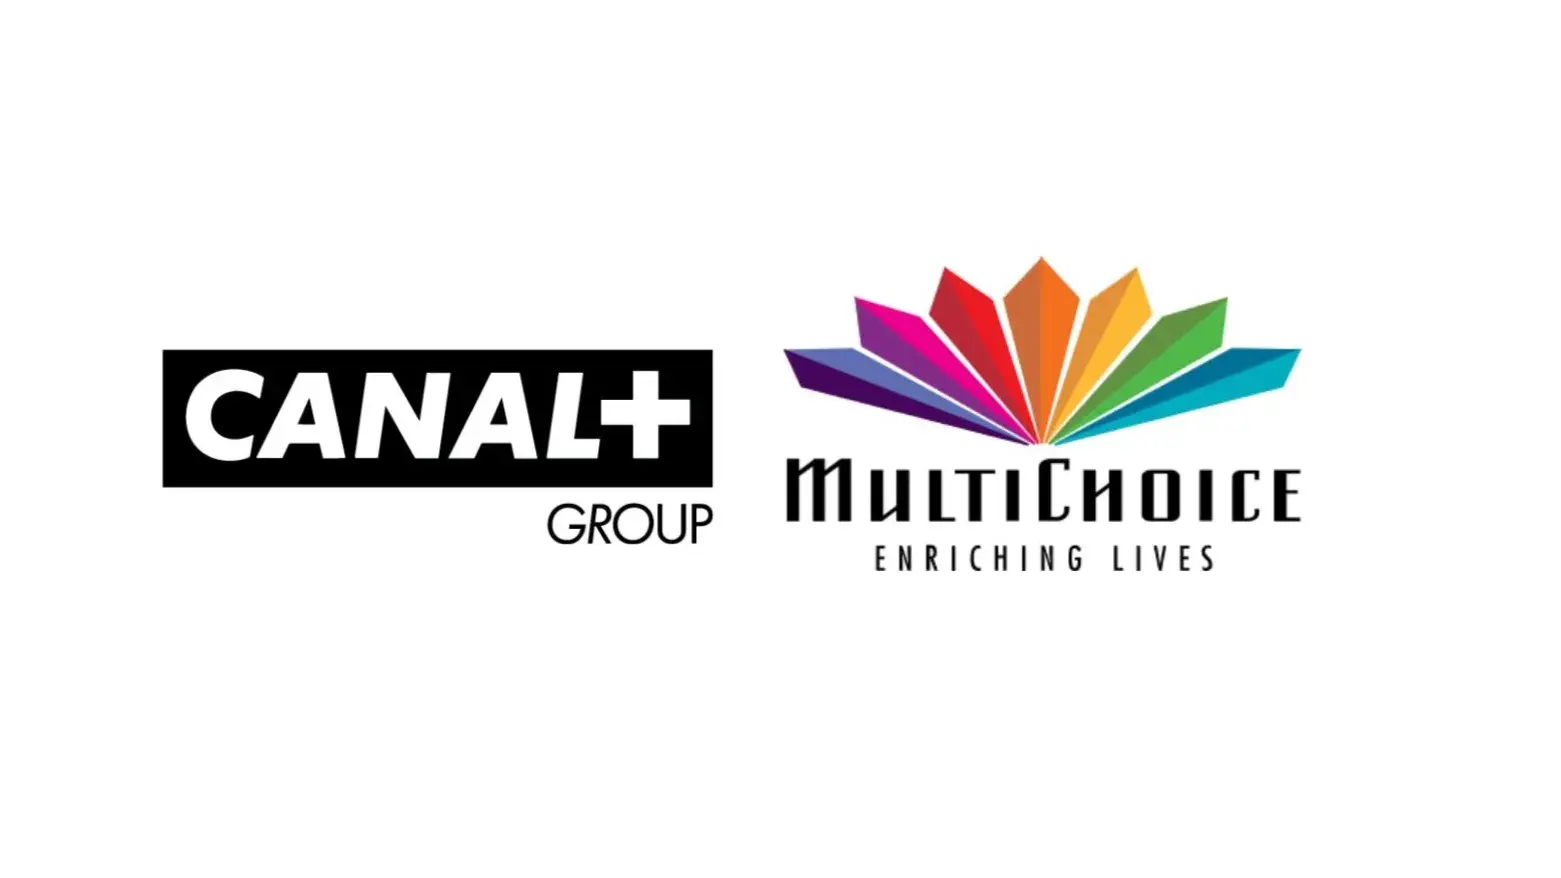 Canal+ and Multichoice